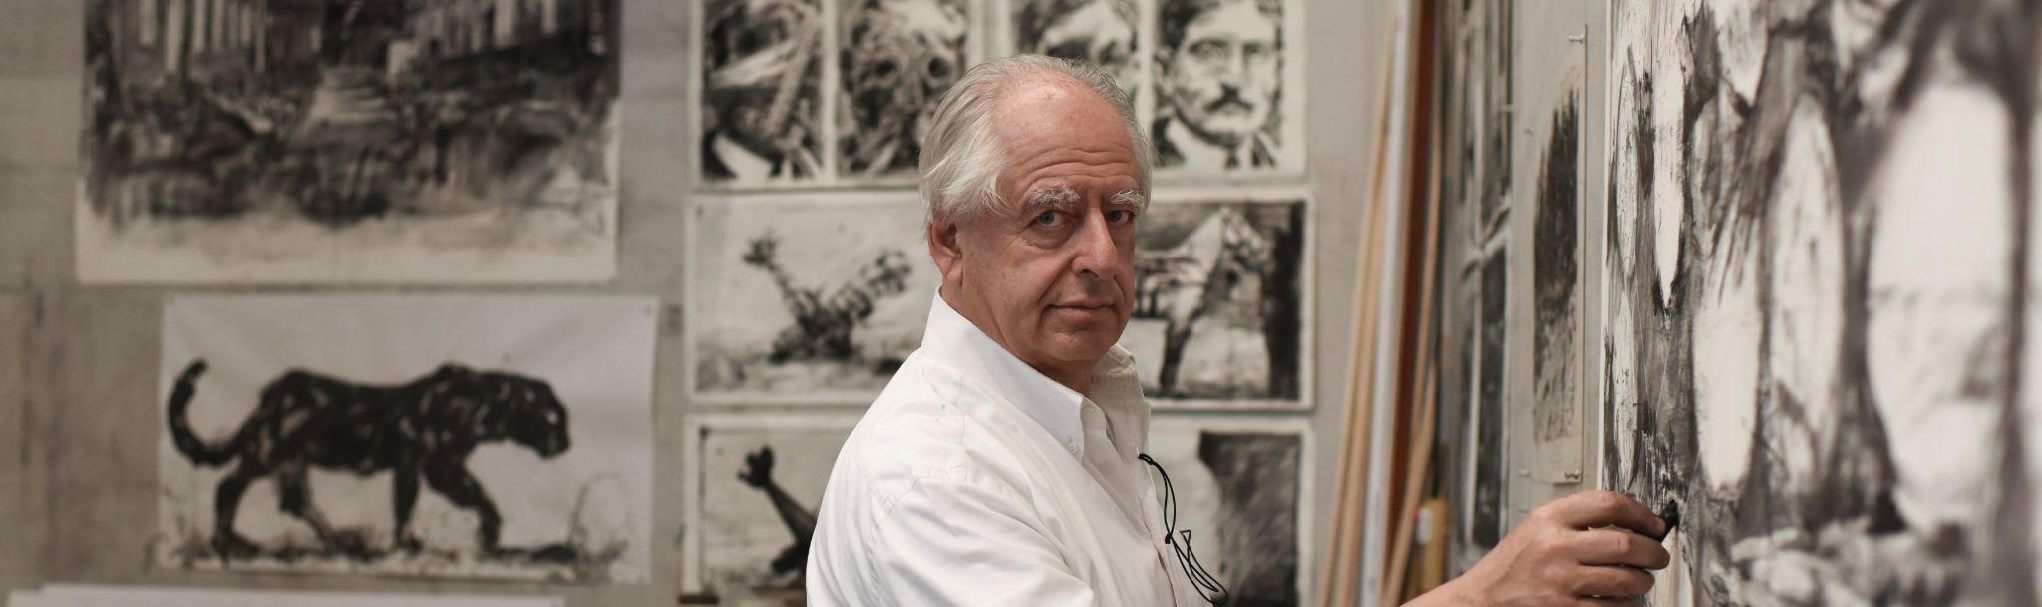 <strong>William Kentridge | The Broad</strong>